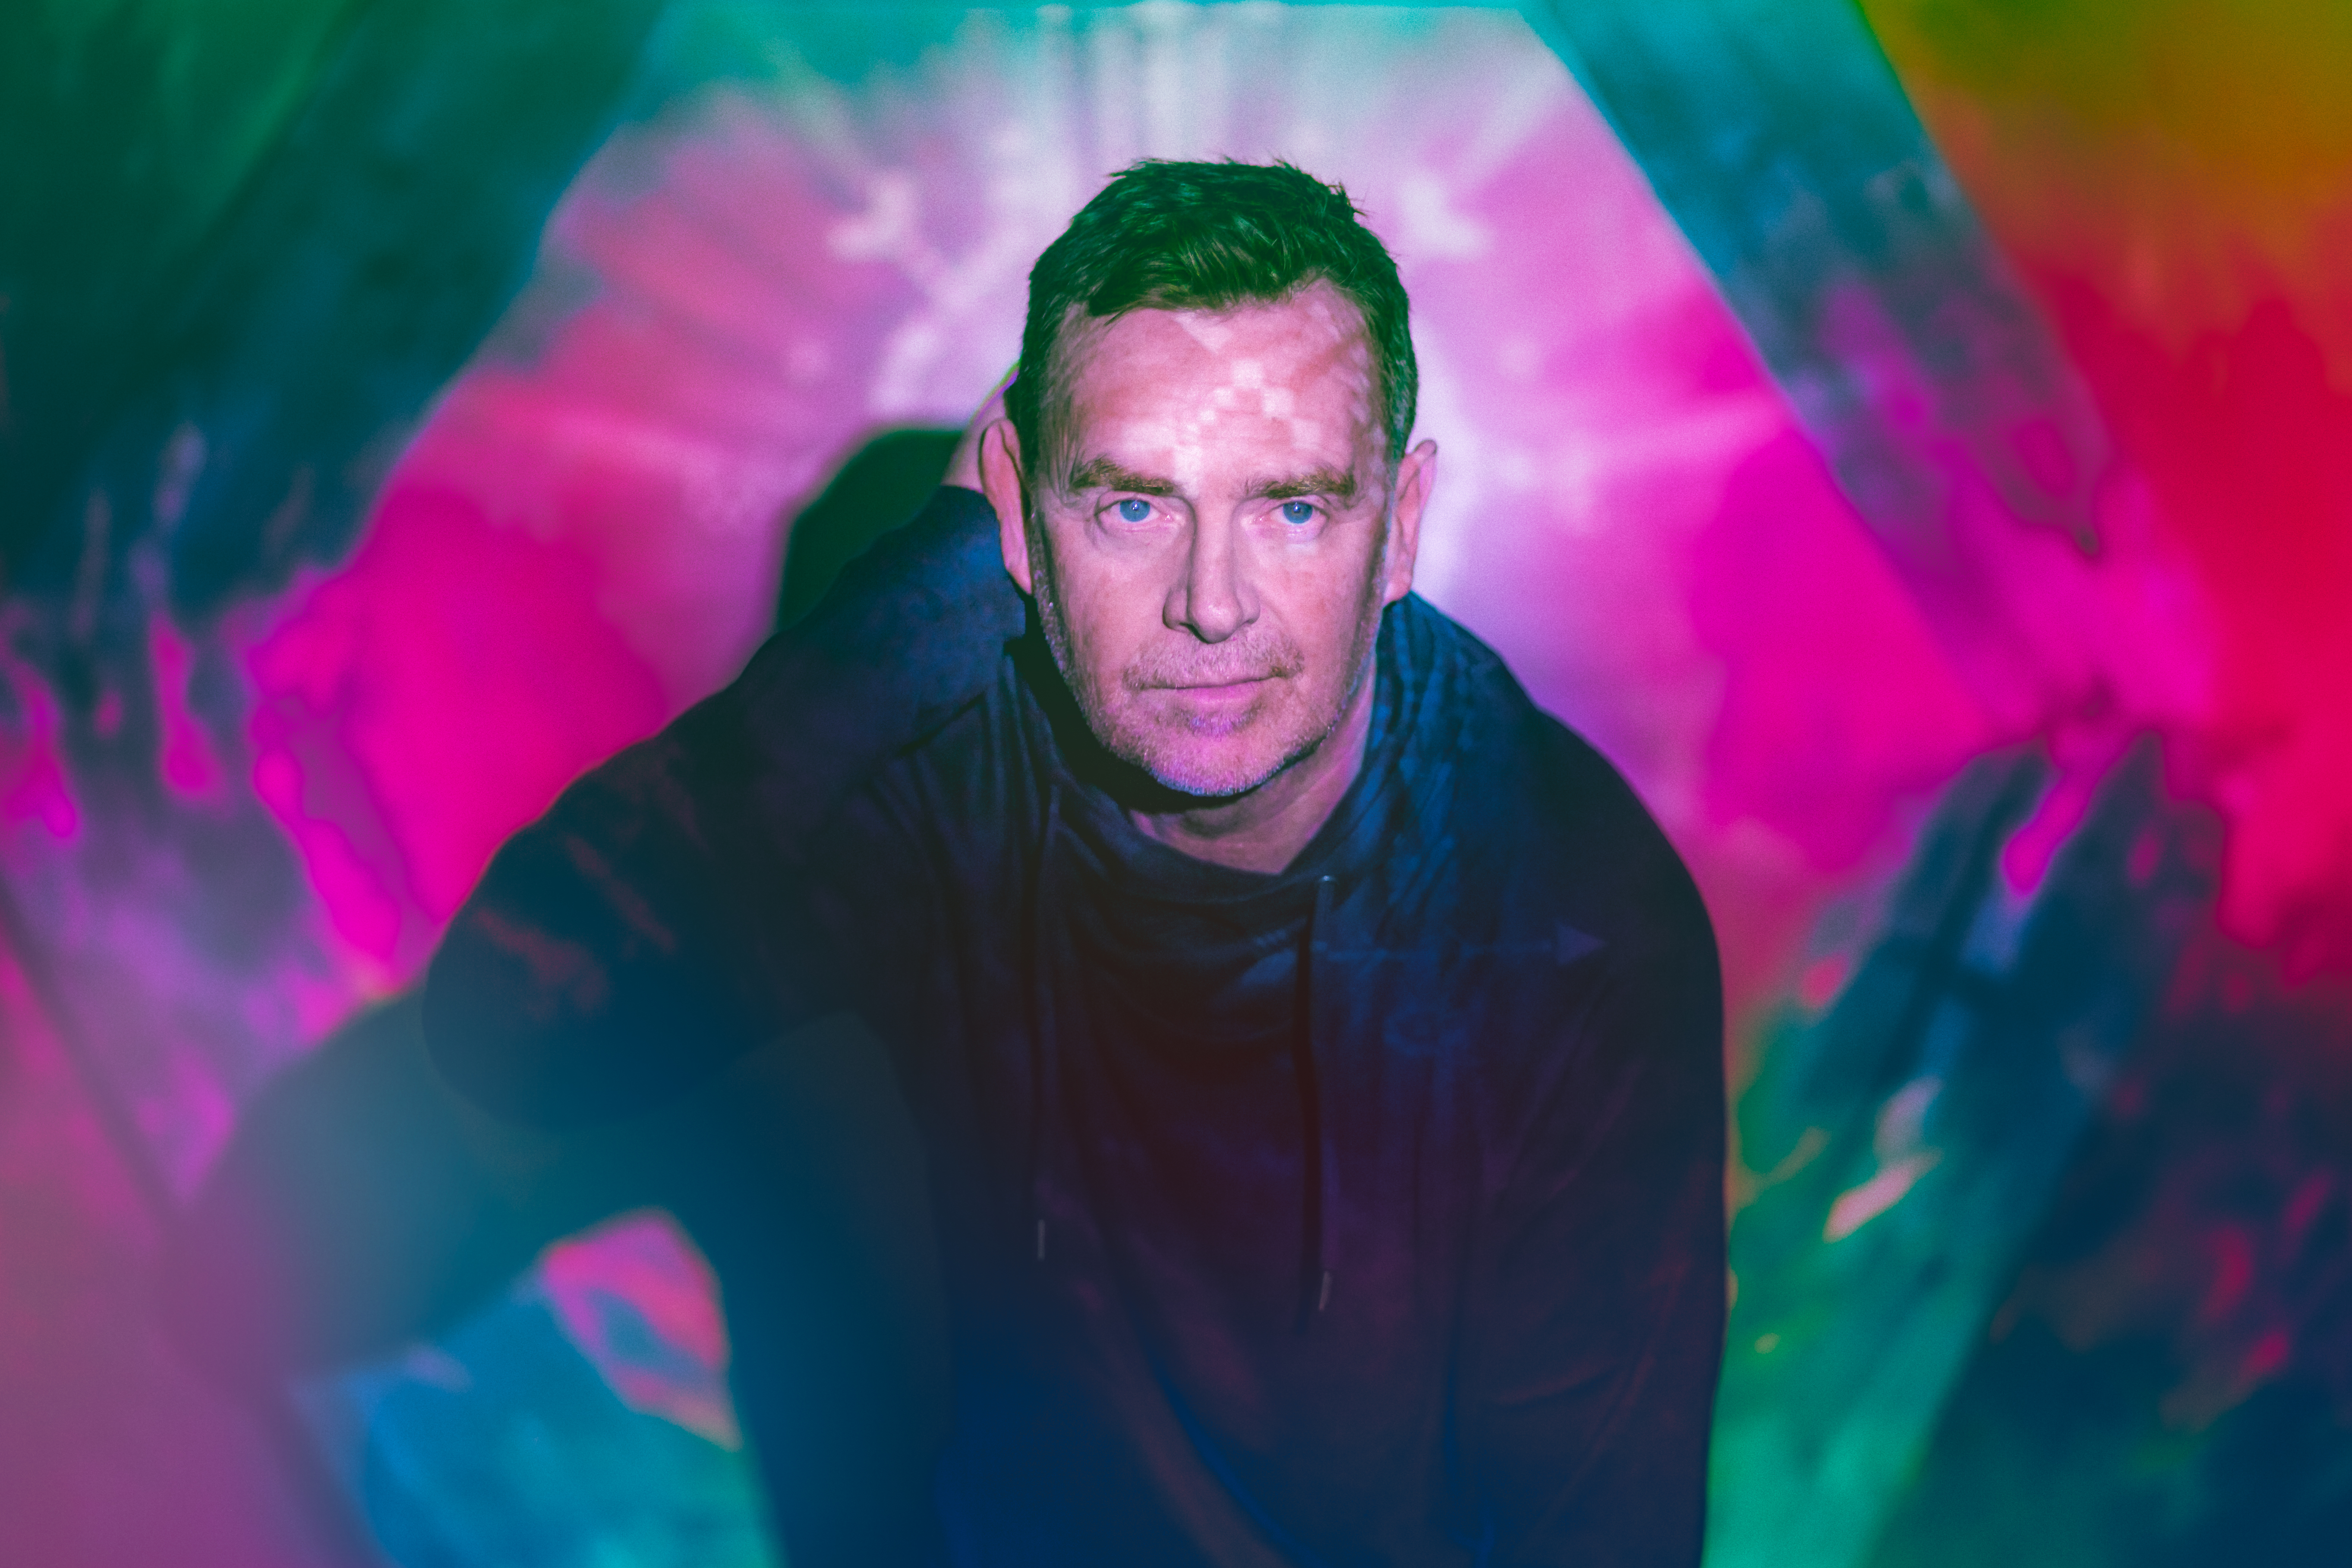 Nick Warren is a master of progressive house music and is playing Dundee's Mains Castle on July 6.